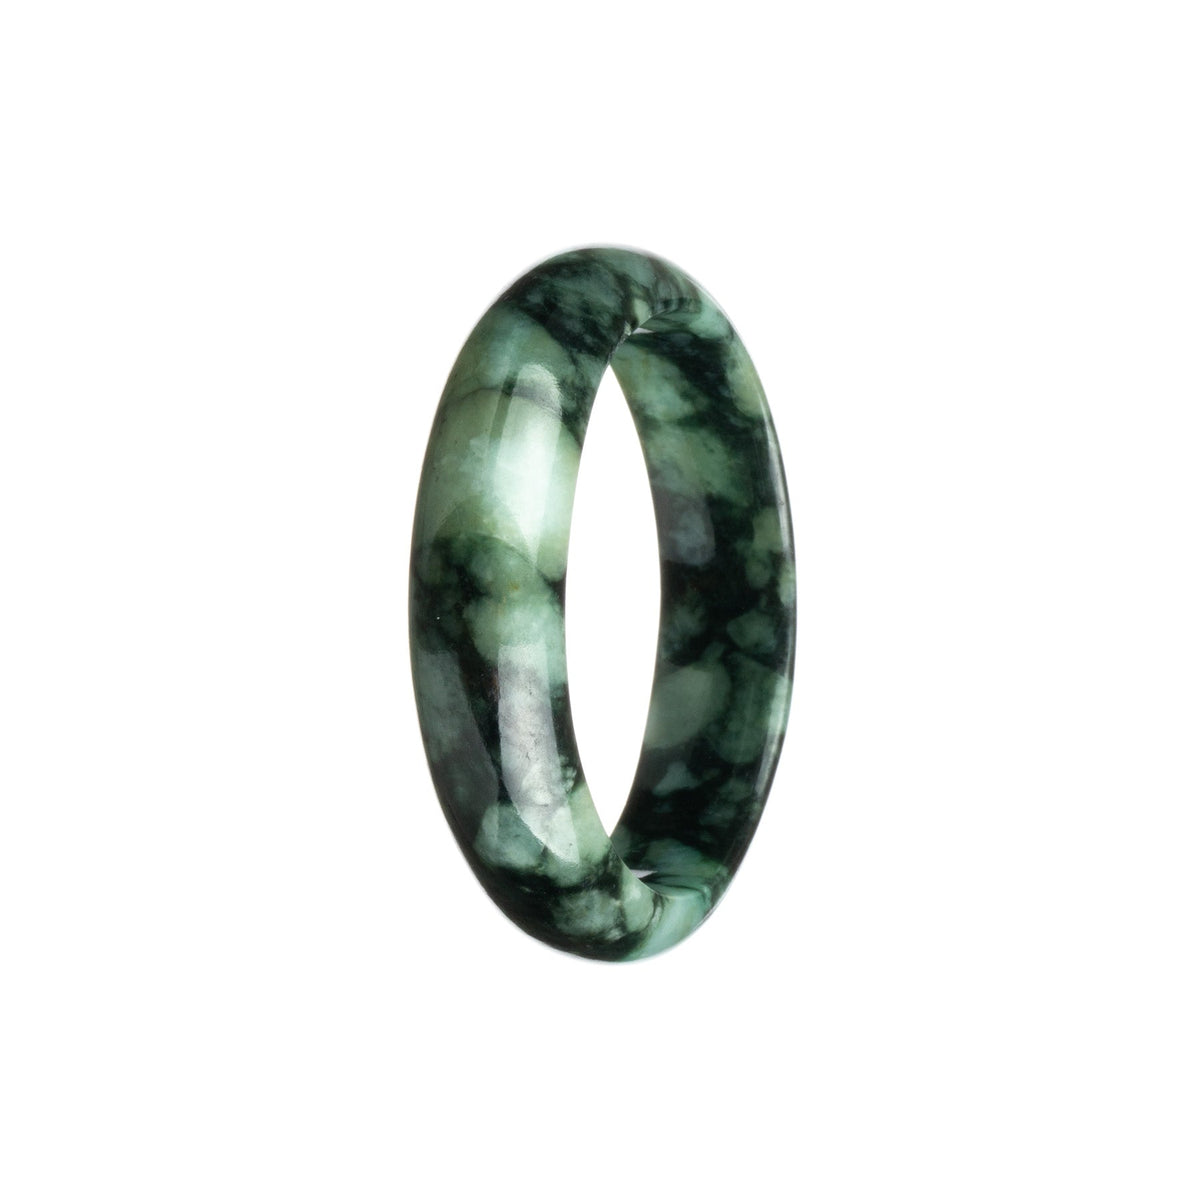 A stunning green and black patterned Burma Jade bracelet, featuring a 53mm half moon shape. A genuine Grade A piece from MAYS GEMS.